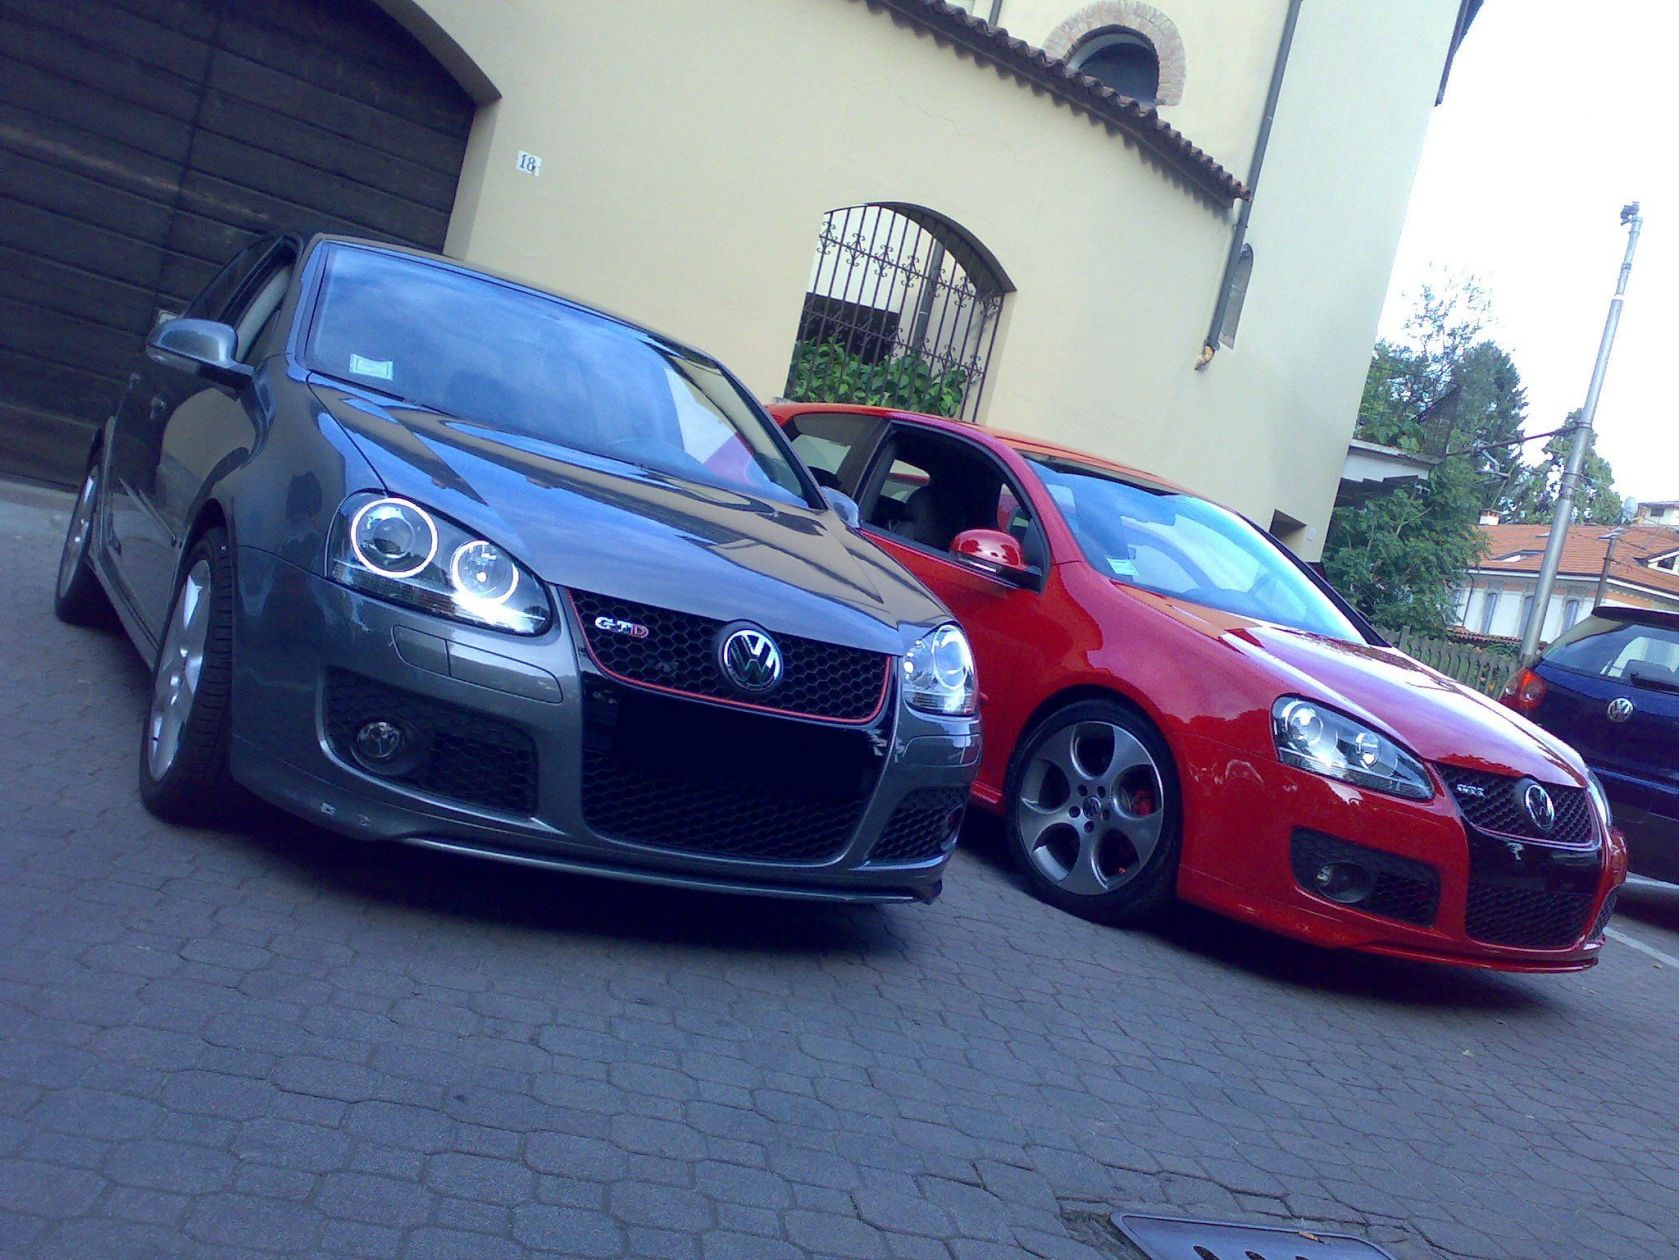 Fromy's & Andre's GTIs
